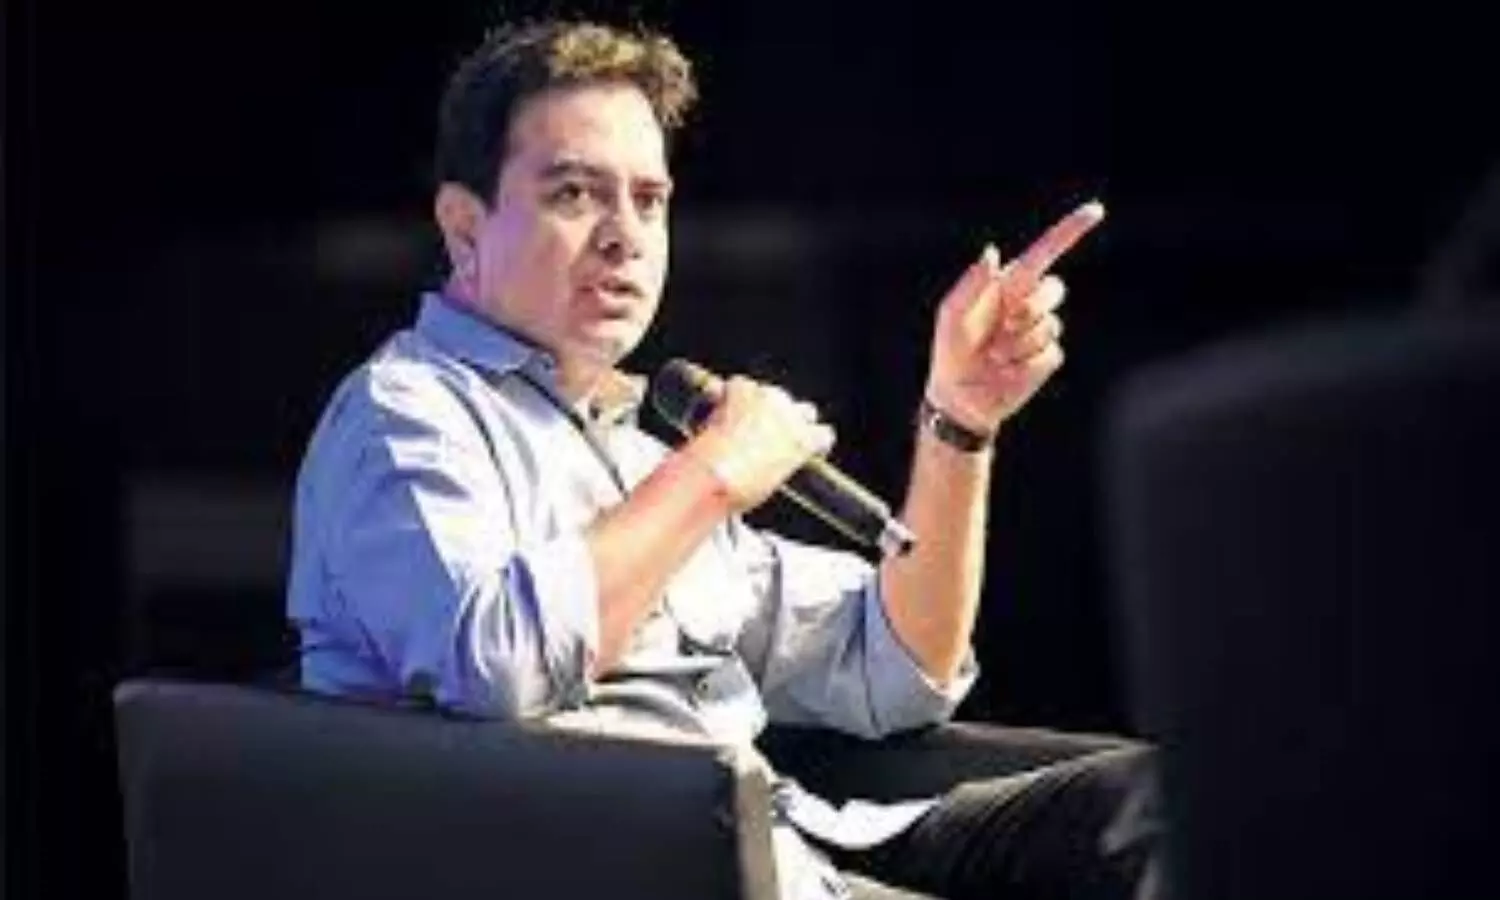 Investors our partners in growth story: KTR